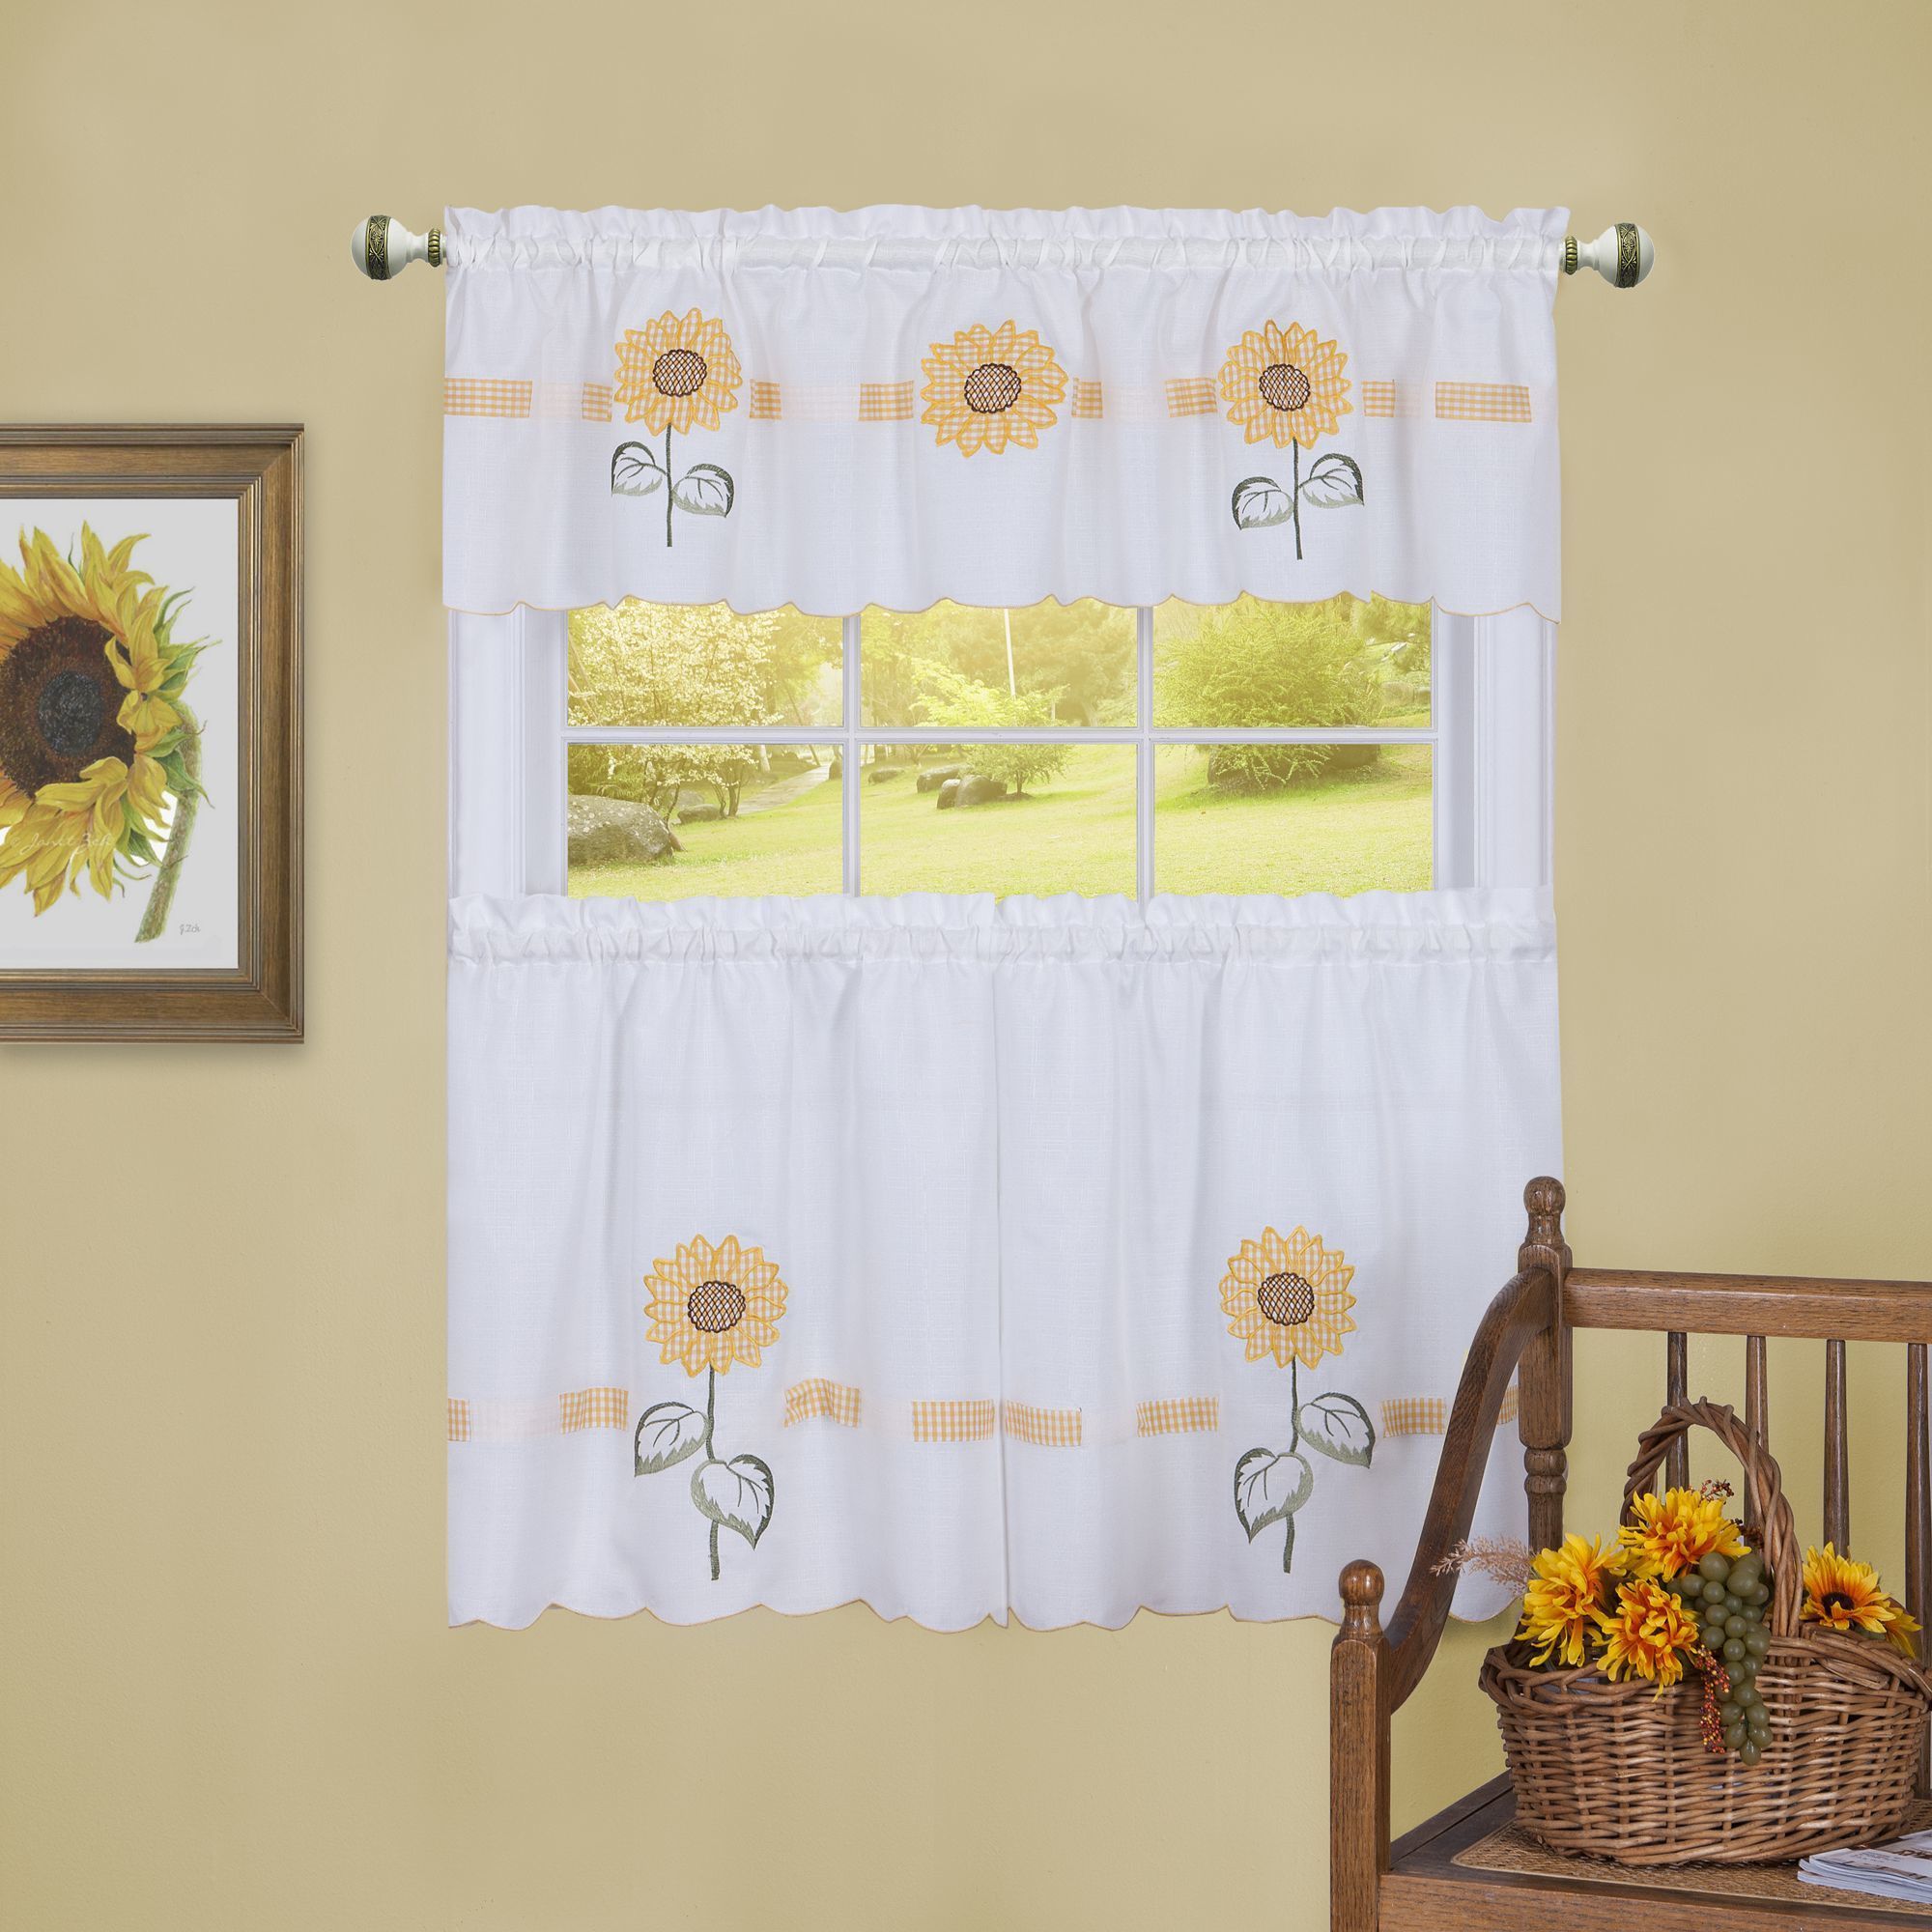 Sun Blossoms Embellished Tier And Valance Window Curtain Set With Regard To Lemon Drop Tier And Valance Window Curtain Sets (View 7 of 20)